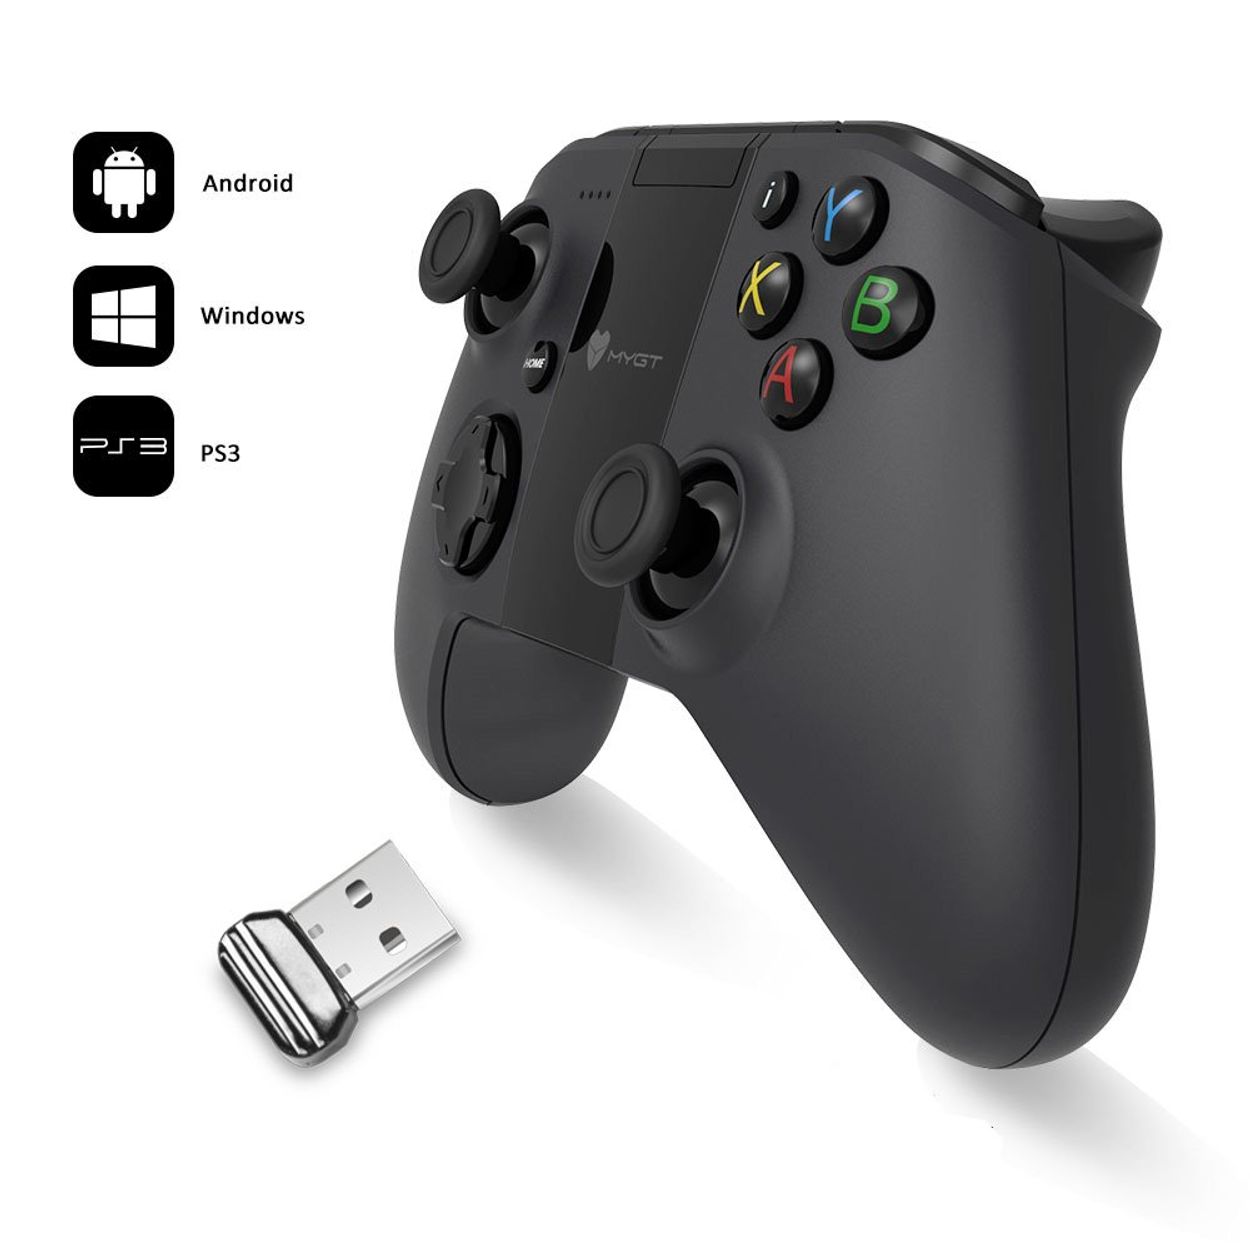 does gamepad companion work with ps3 controller